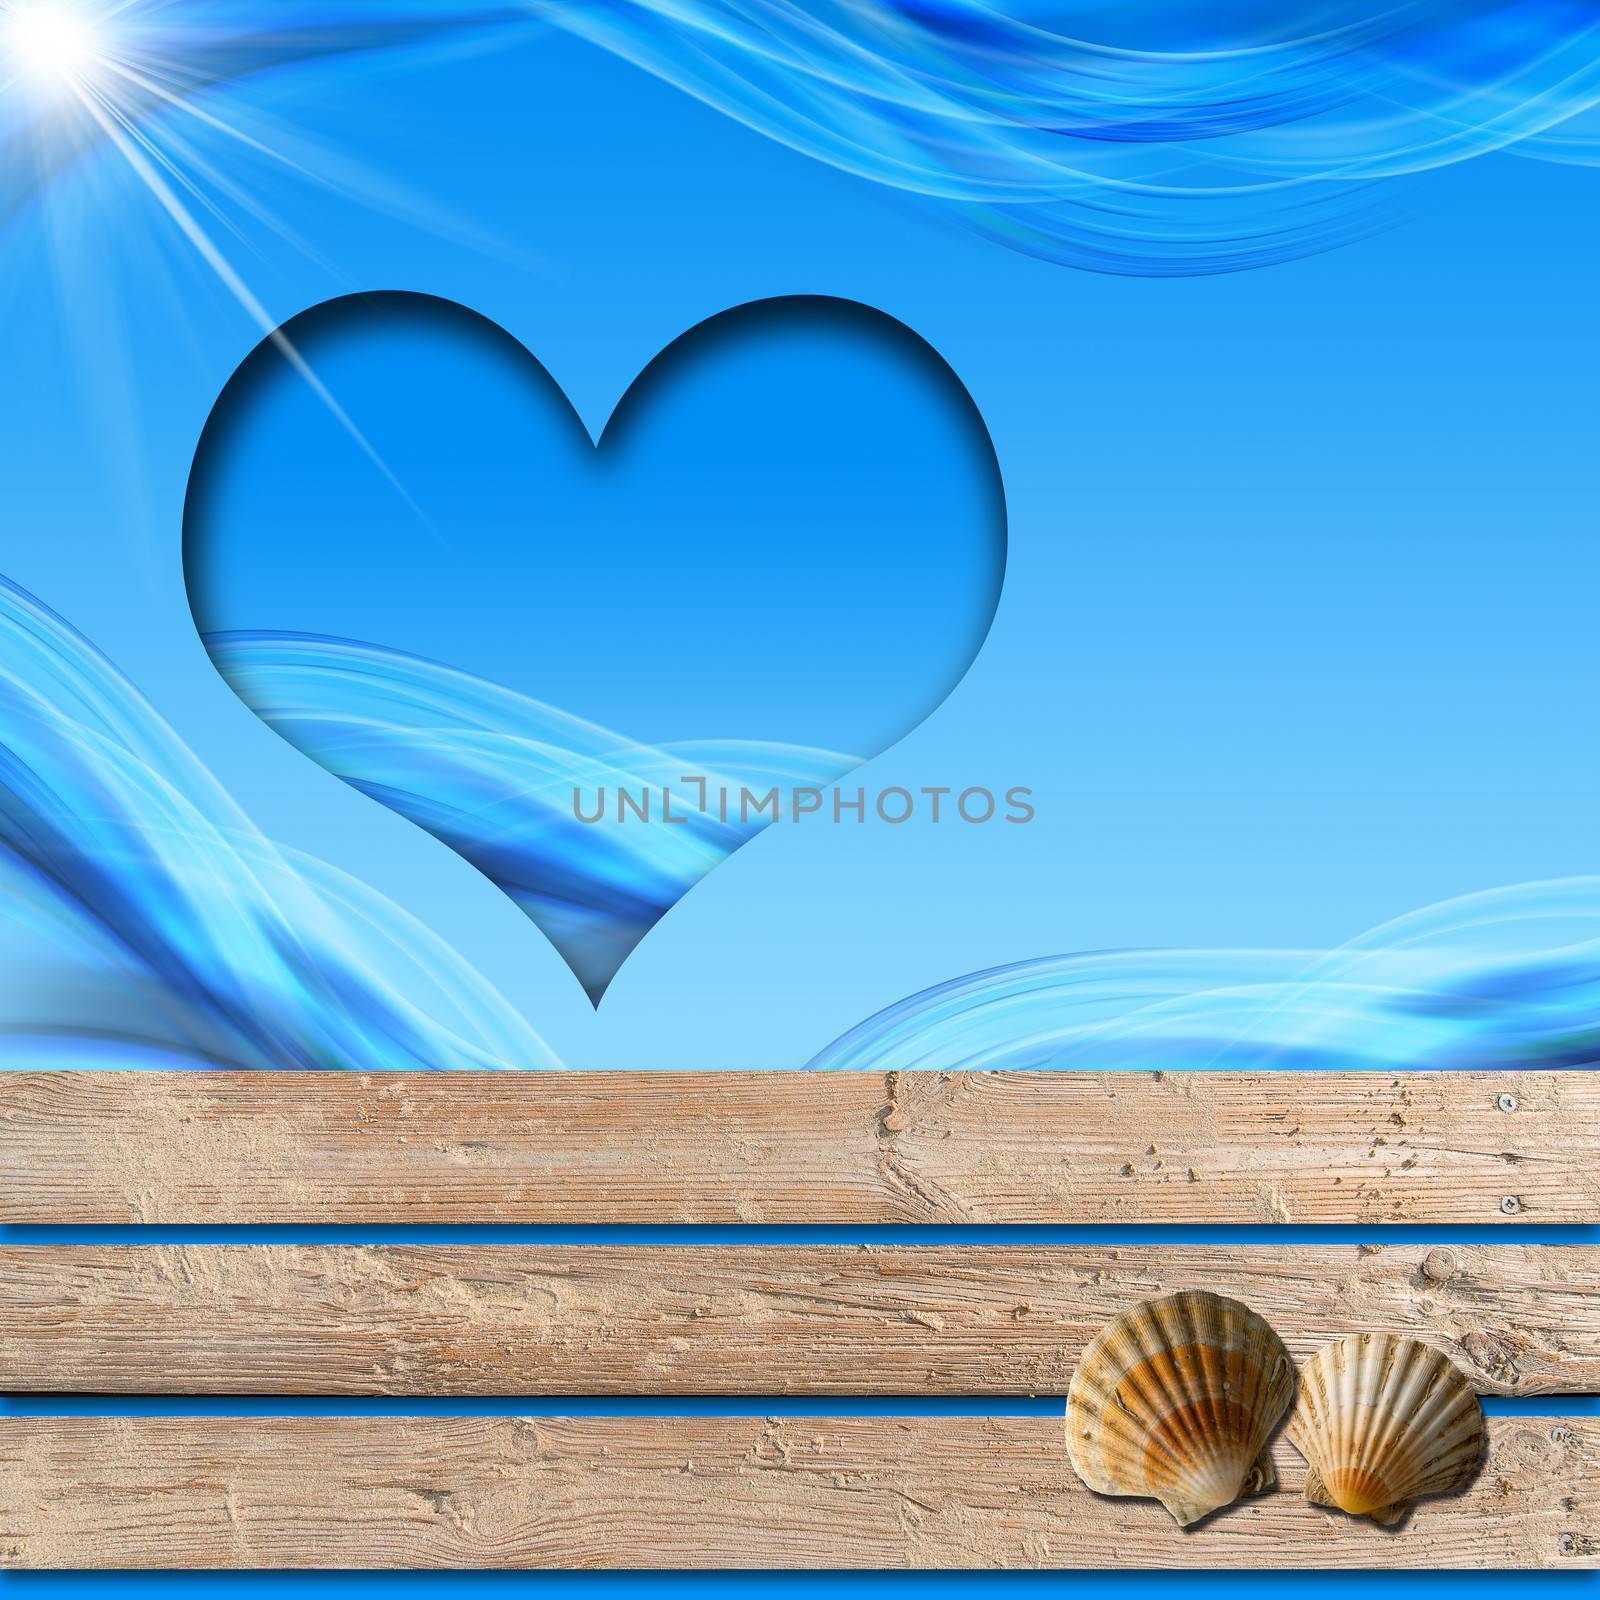 Background with sea and blue stylized waves, wooden walkway, seashells and blue hearth

